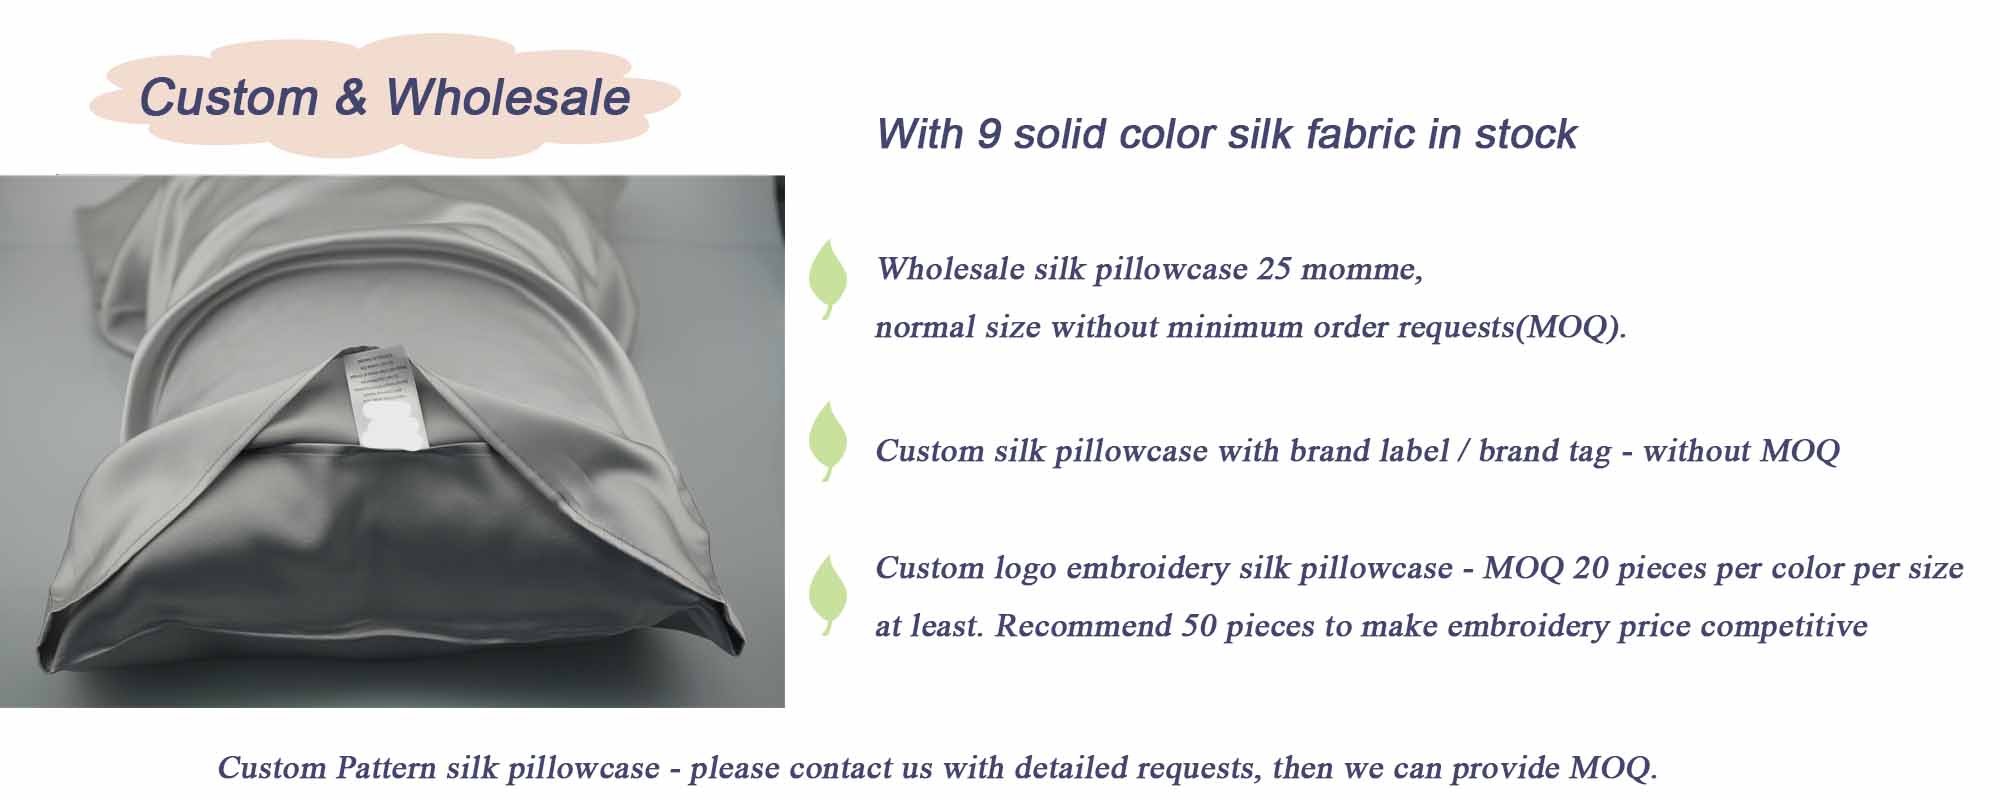 25 momme mulberry silk pillowcase